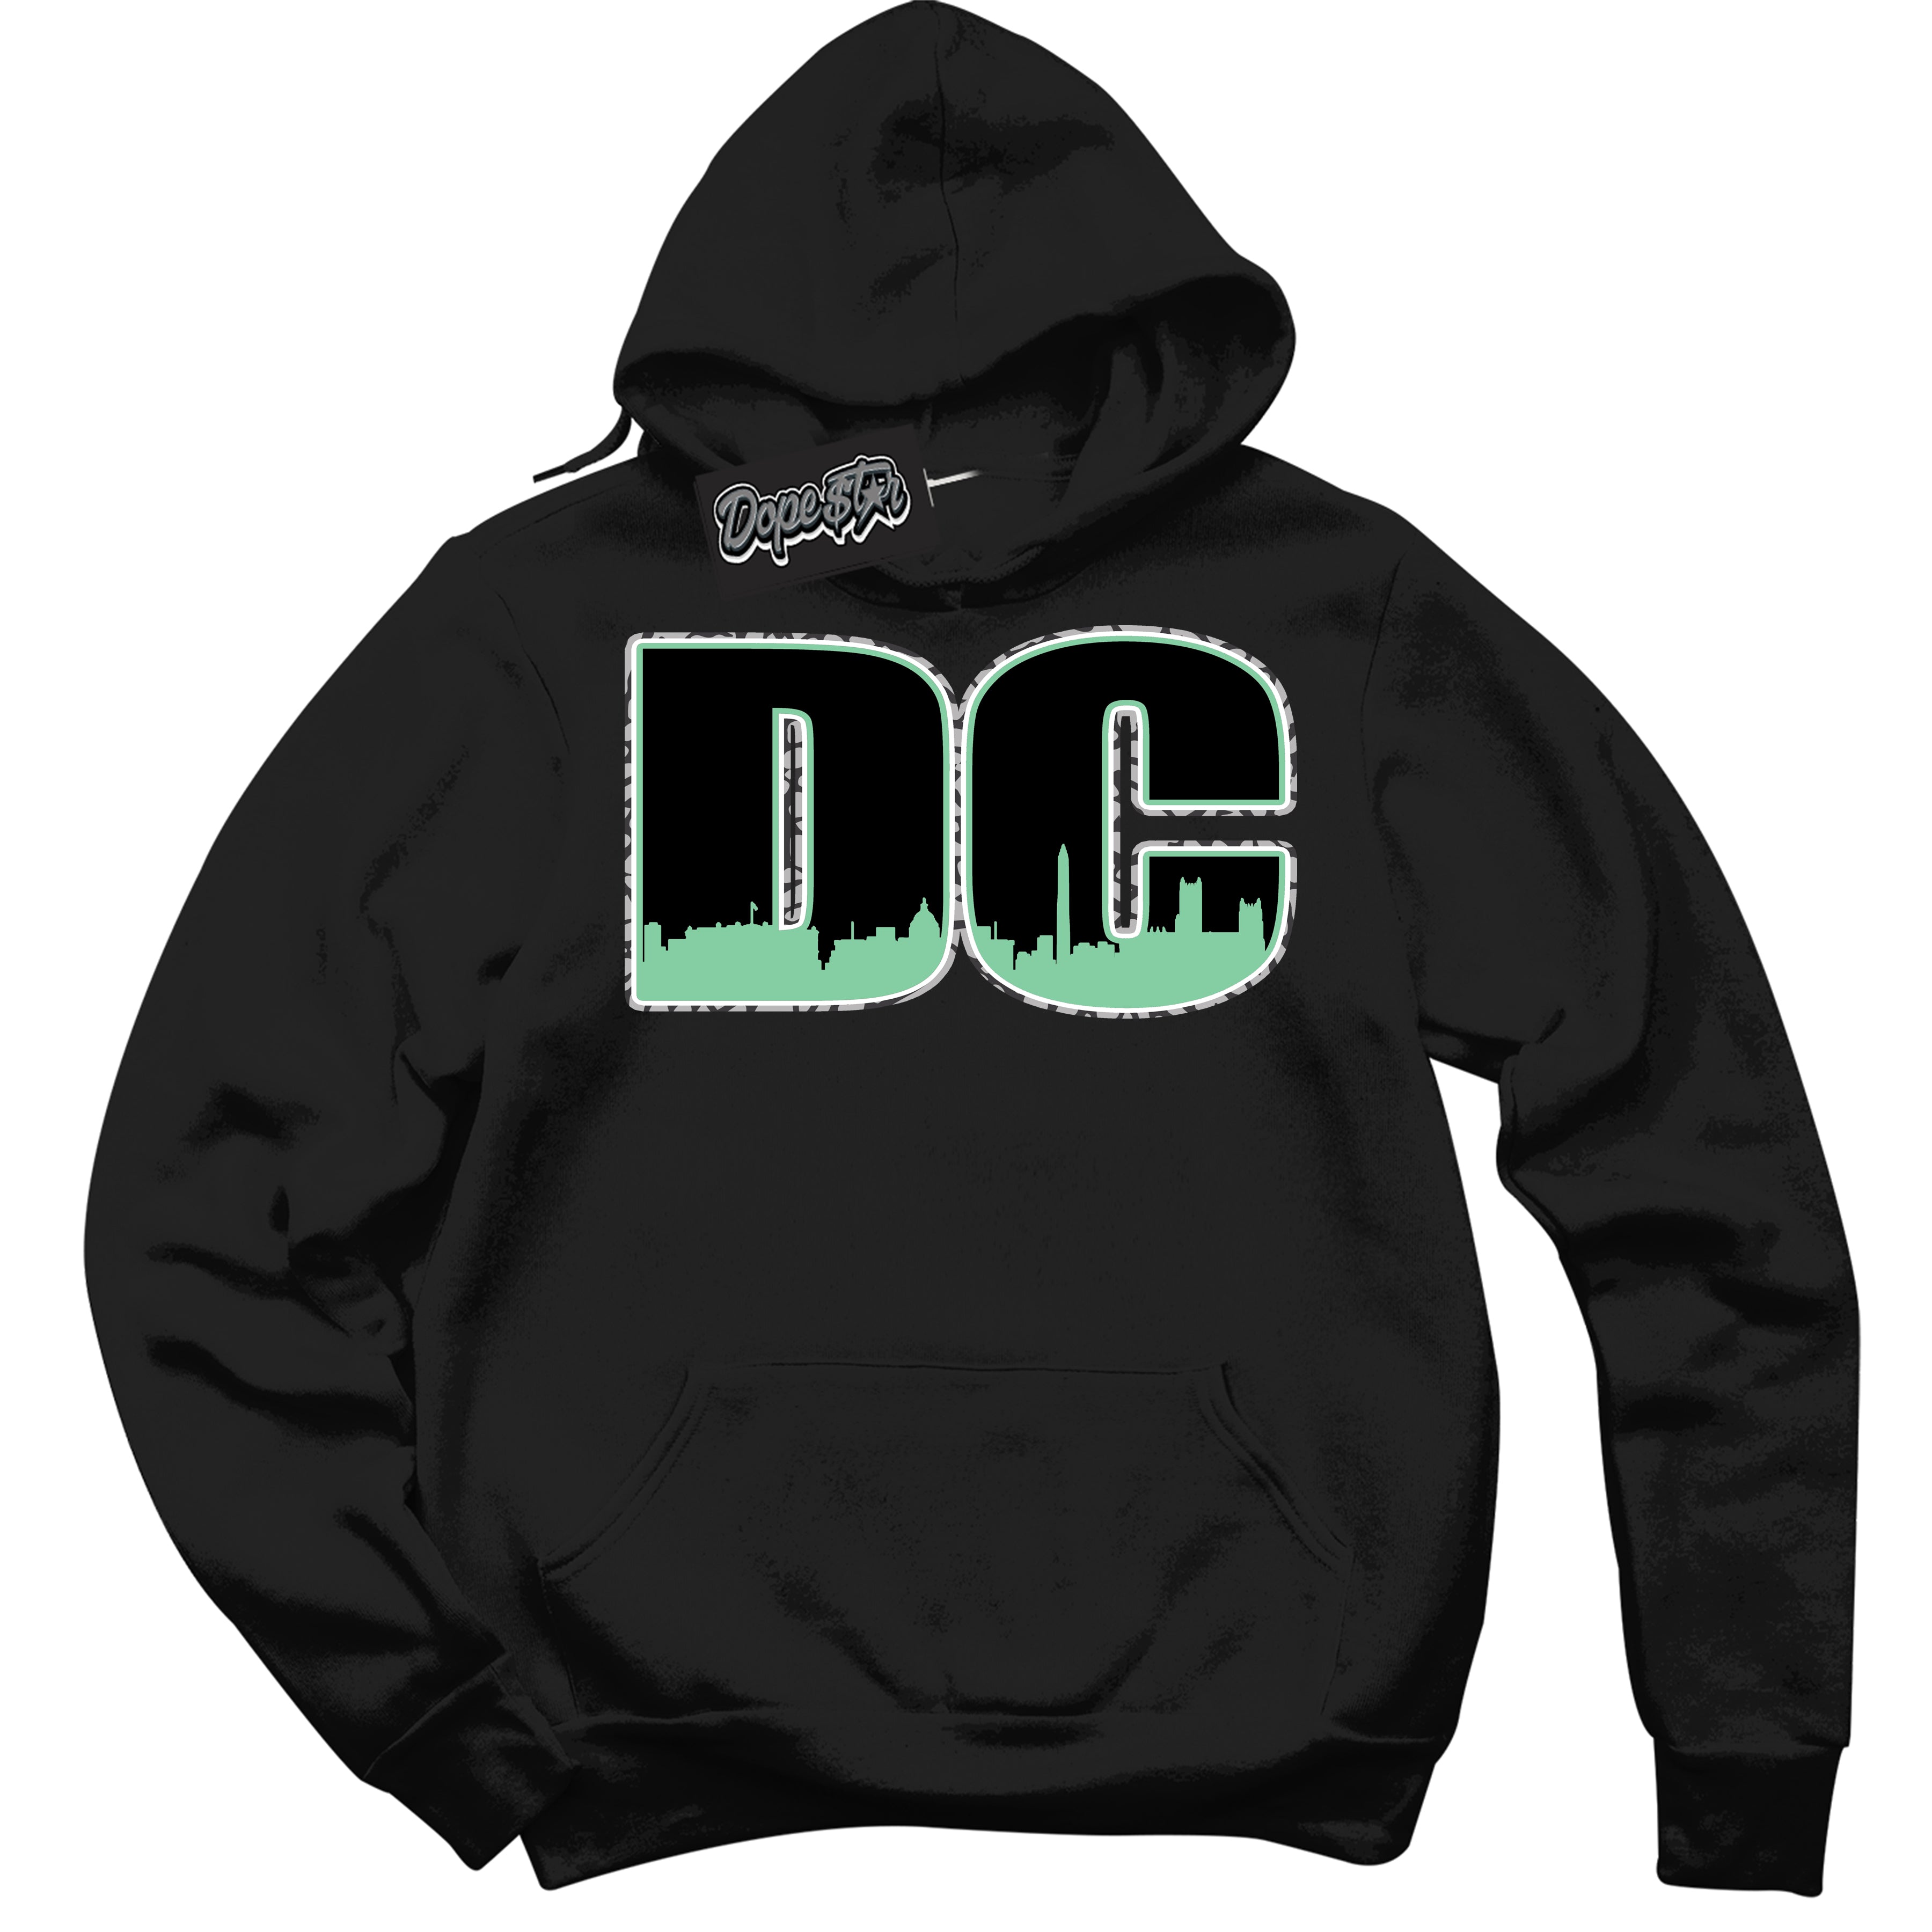 Cool Black Graphic DopeStar Hoodie with “ DC “ print, that perfectly matches Green Glow 3S sneakers